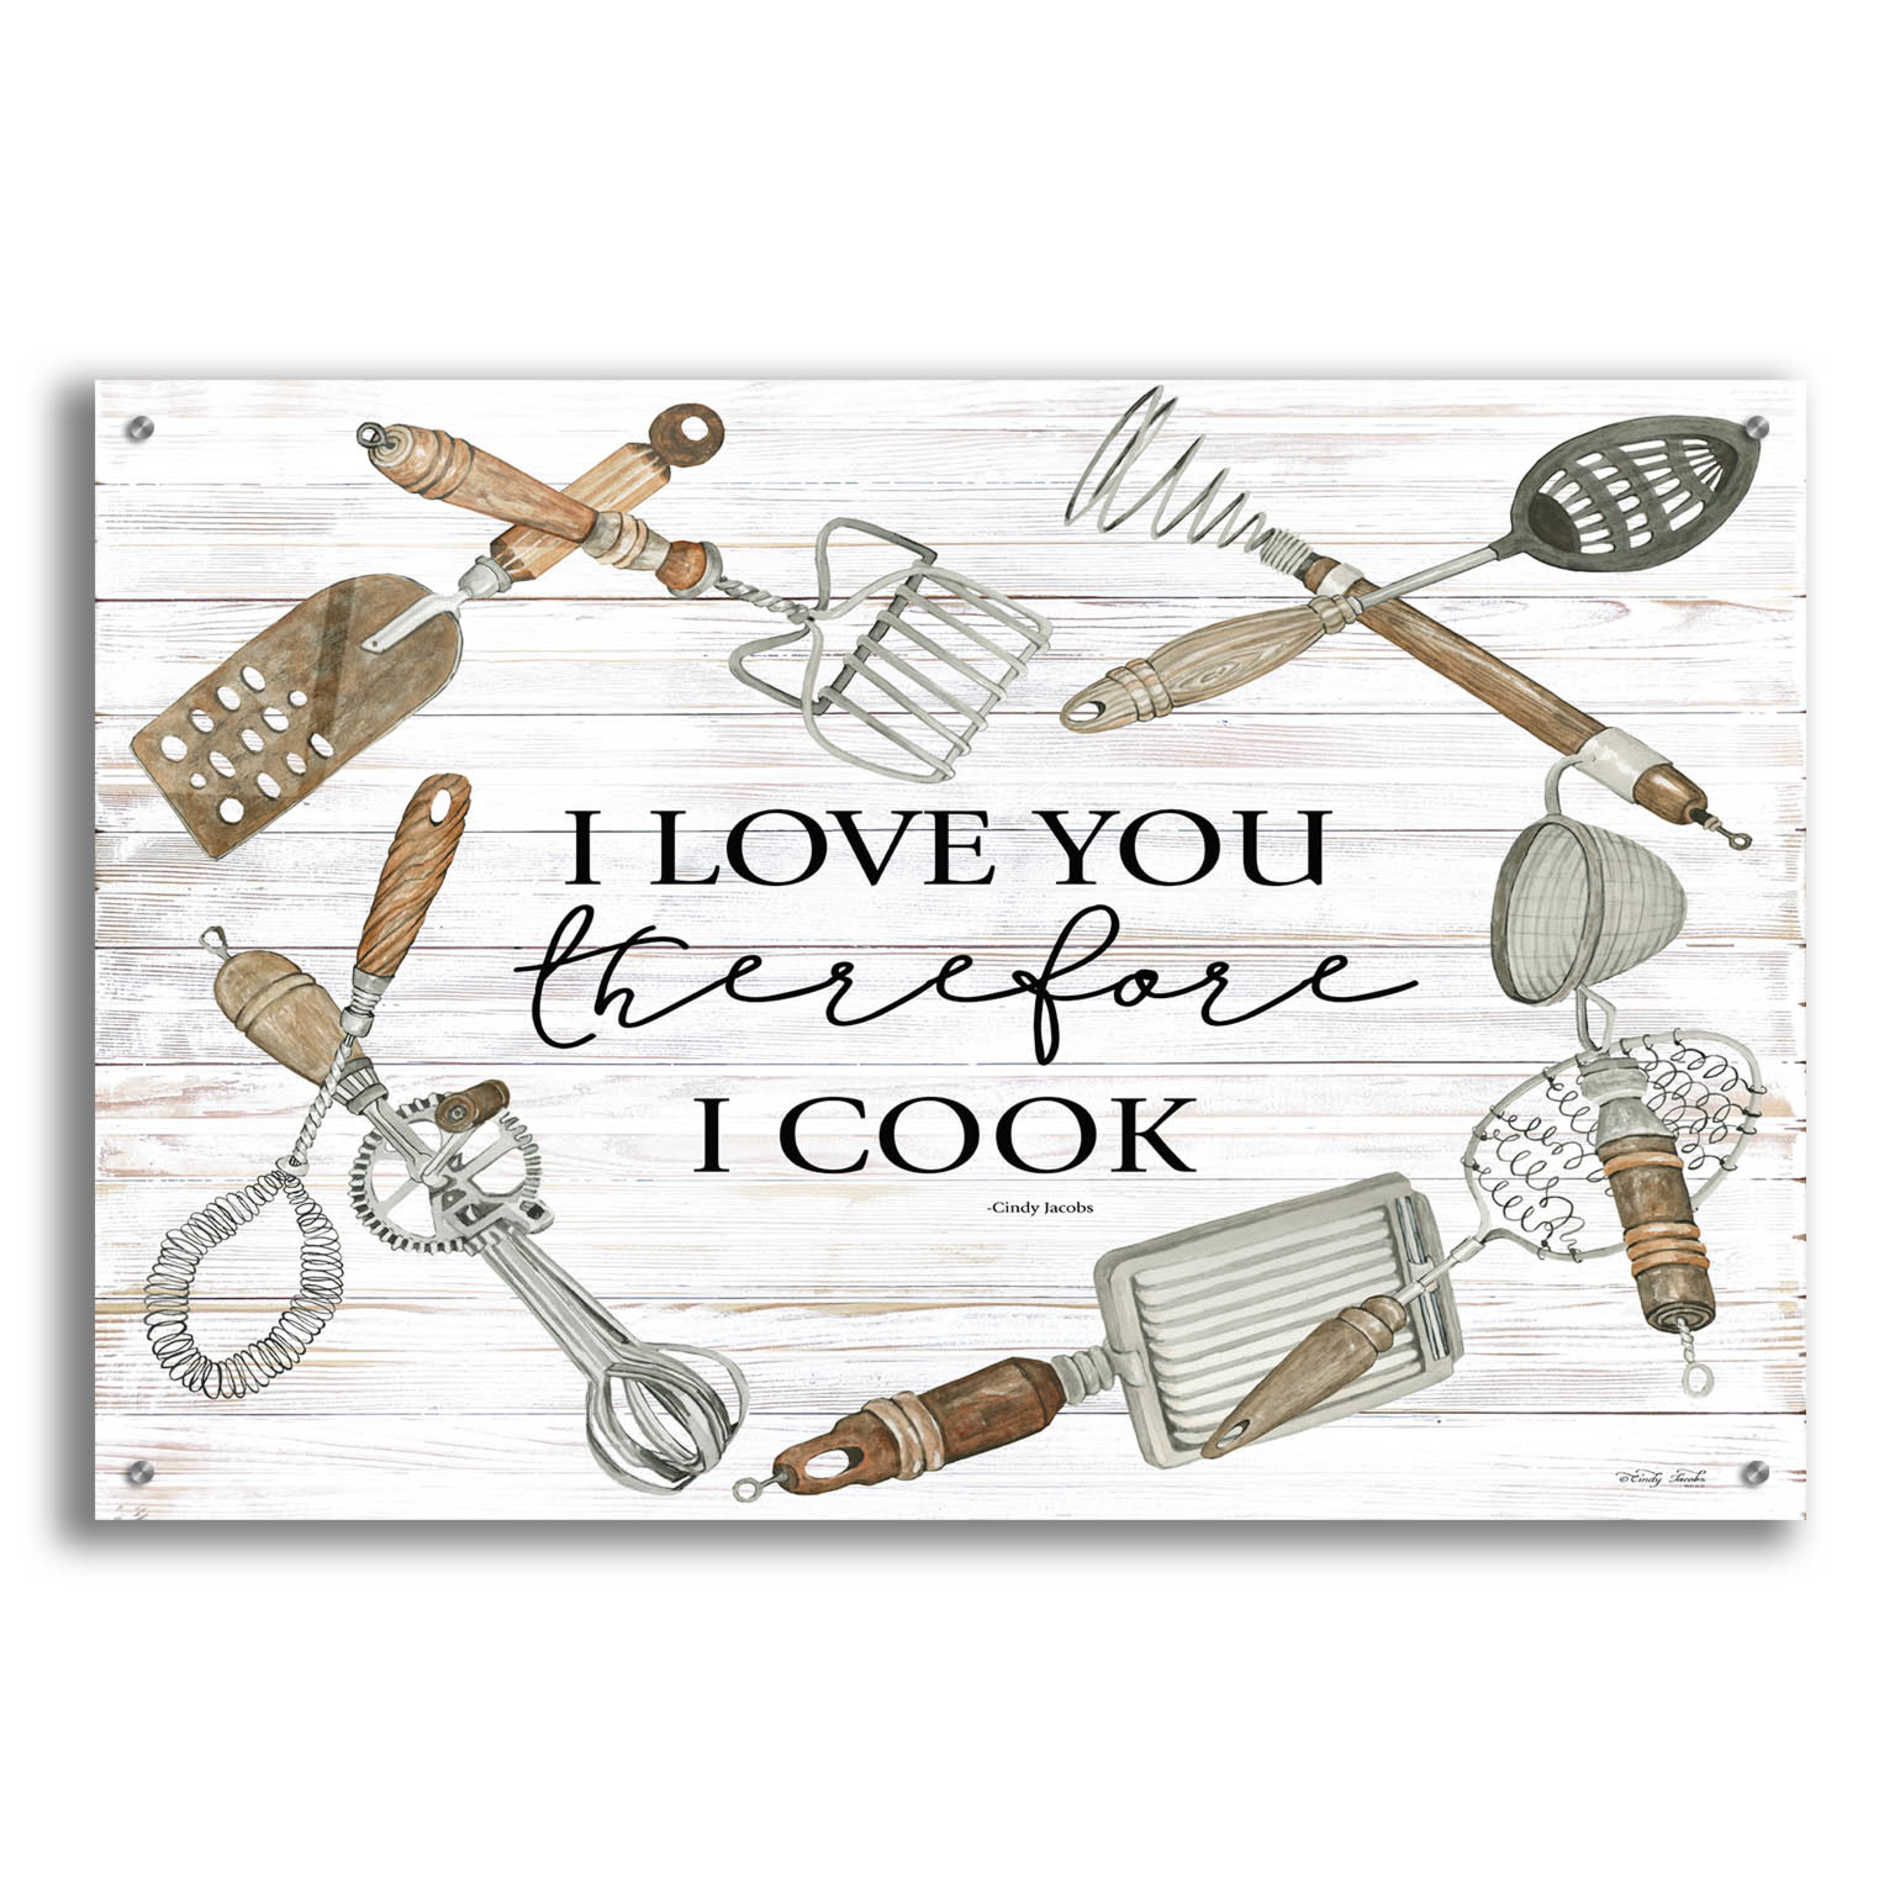 Epic Art 'I Love You Therefore I Cook' by Cindy Jacobs, Acrylic Glass Wall Art,36x24